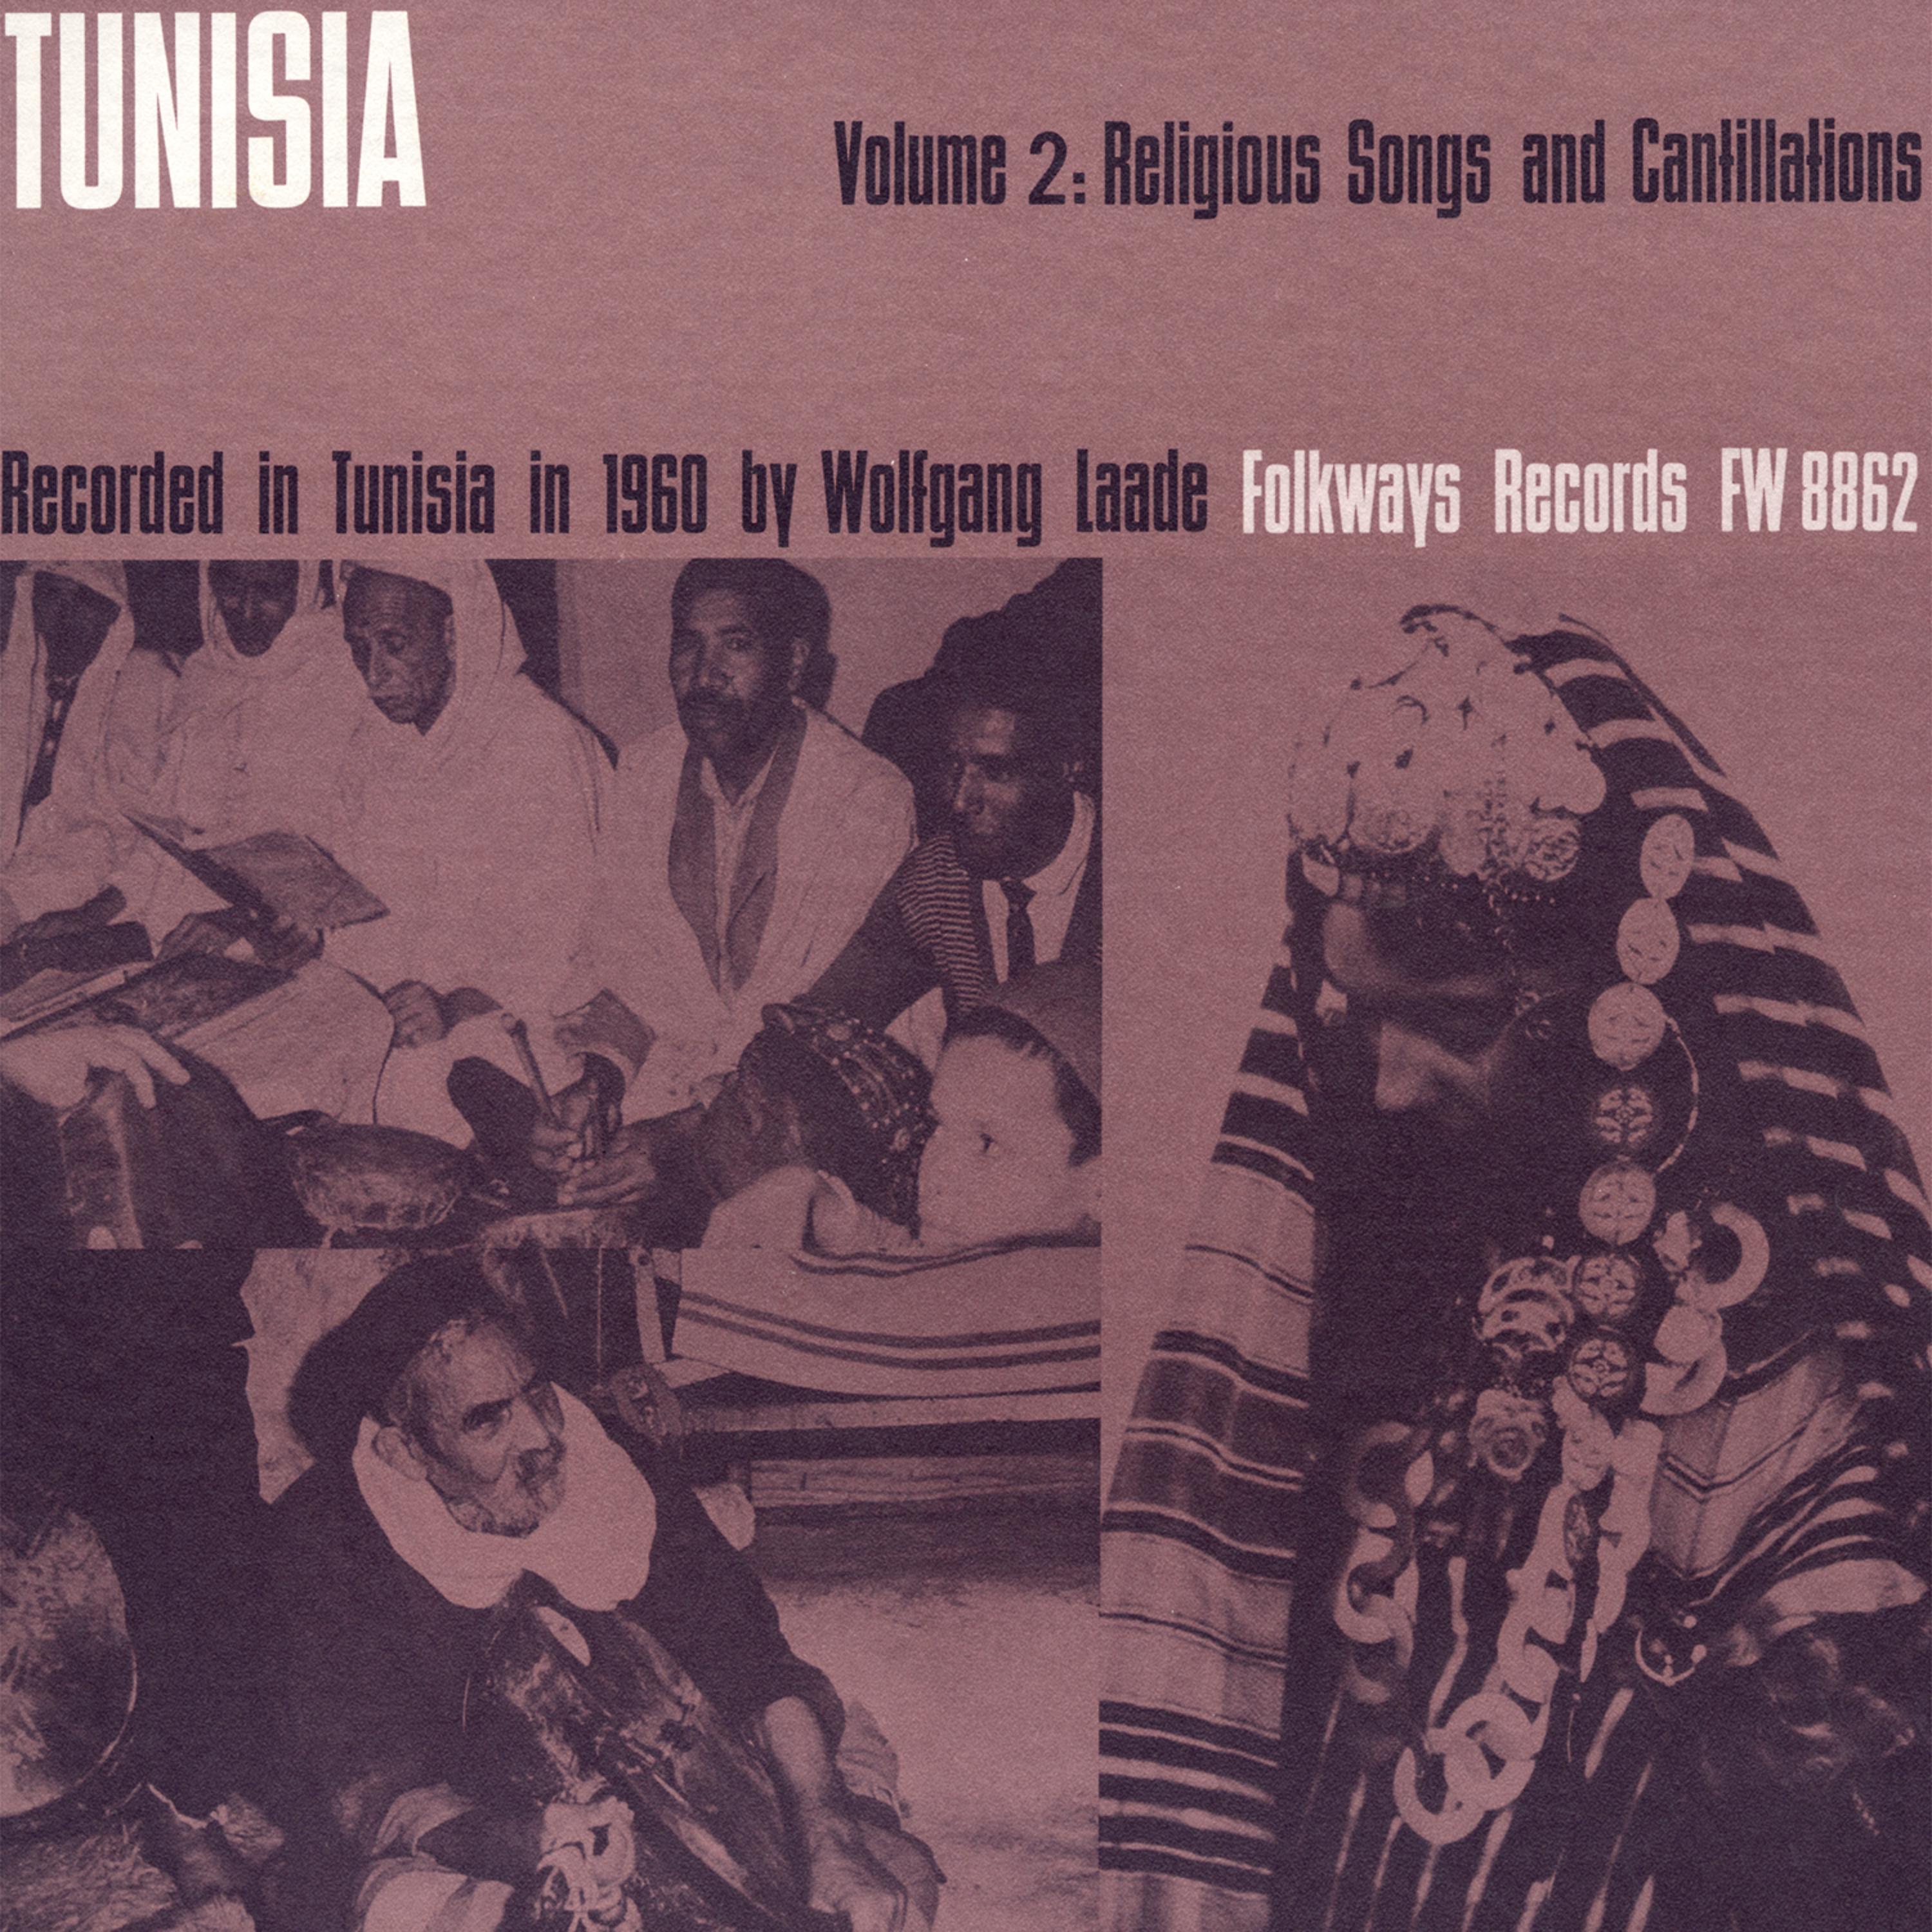 Постер альбома Tunisia, Vol. 2: Religious Songs and Cantillations from Tunisia